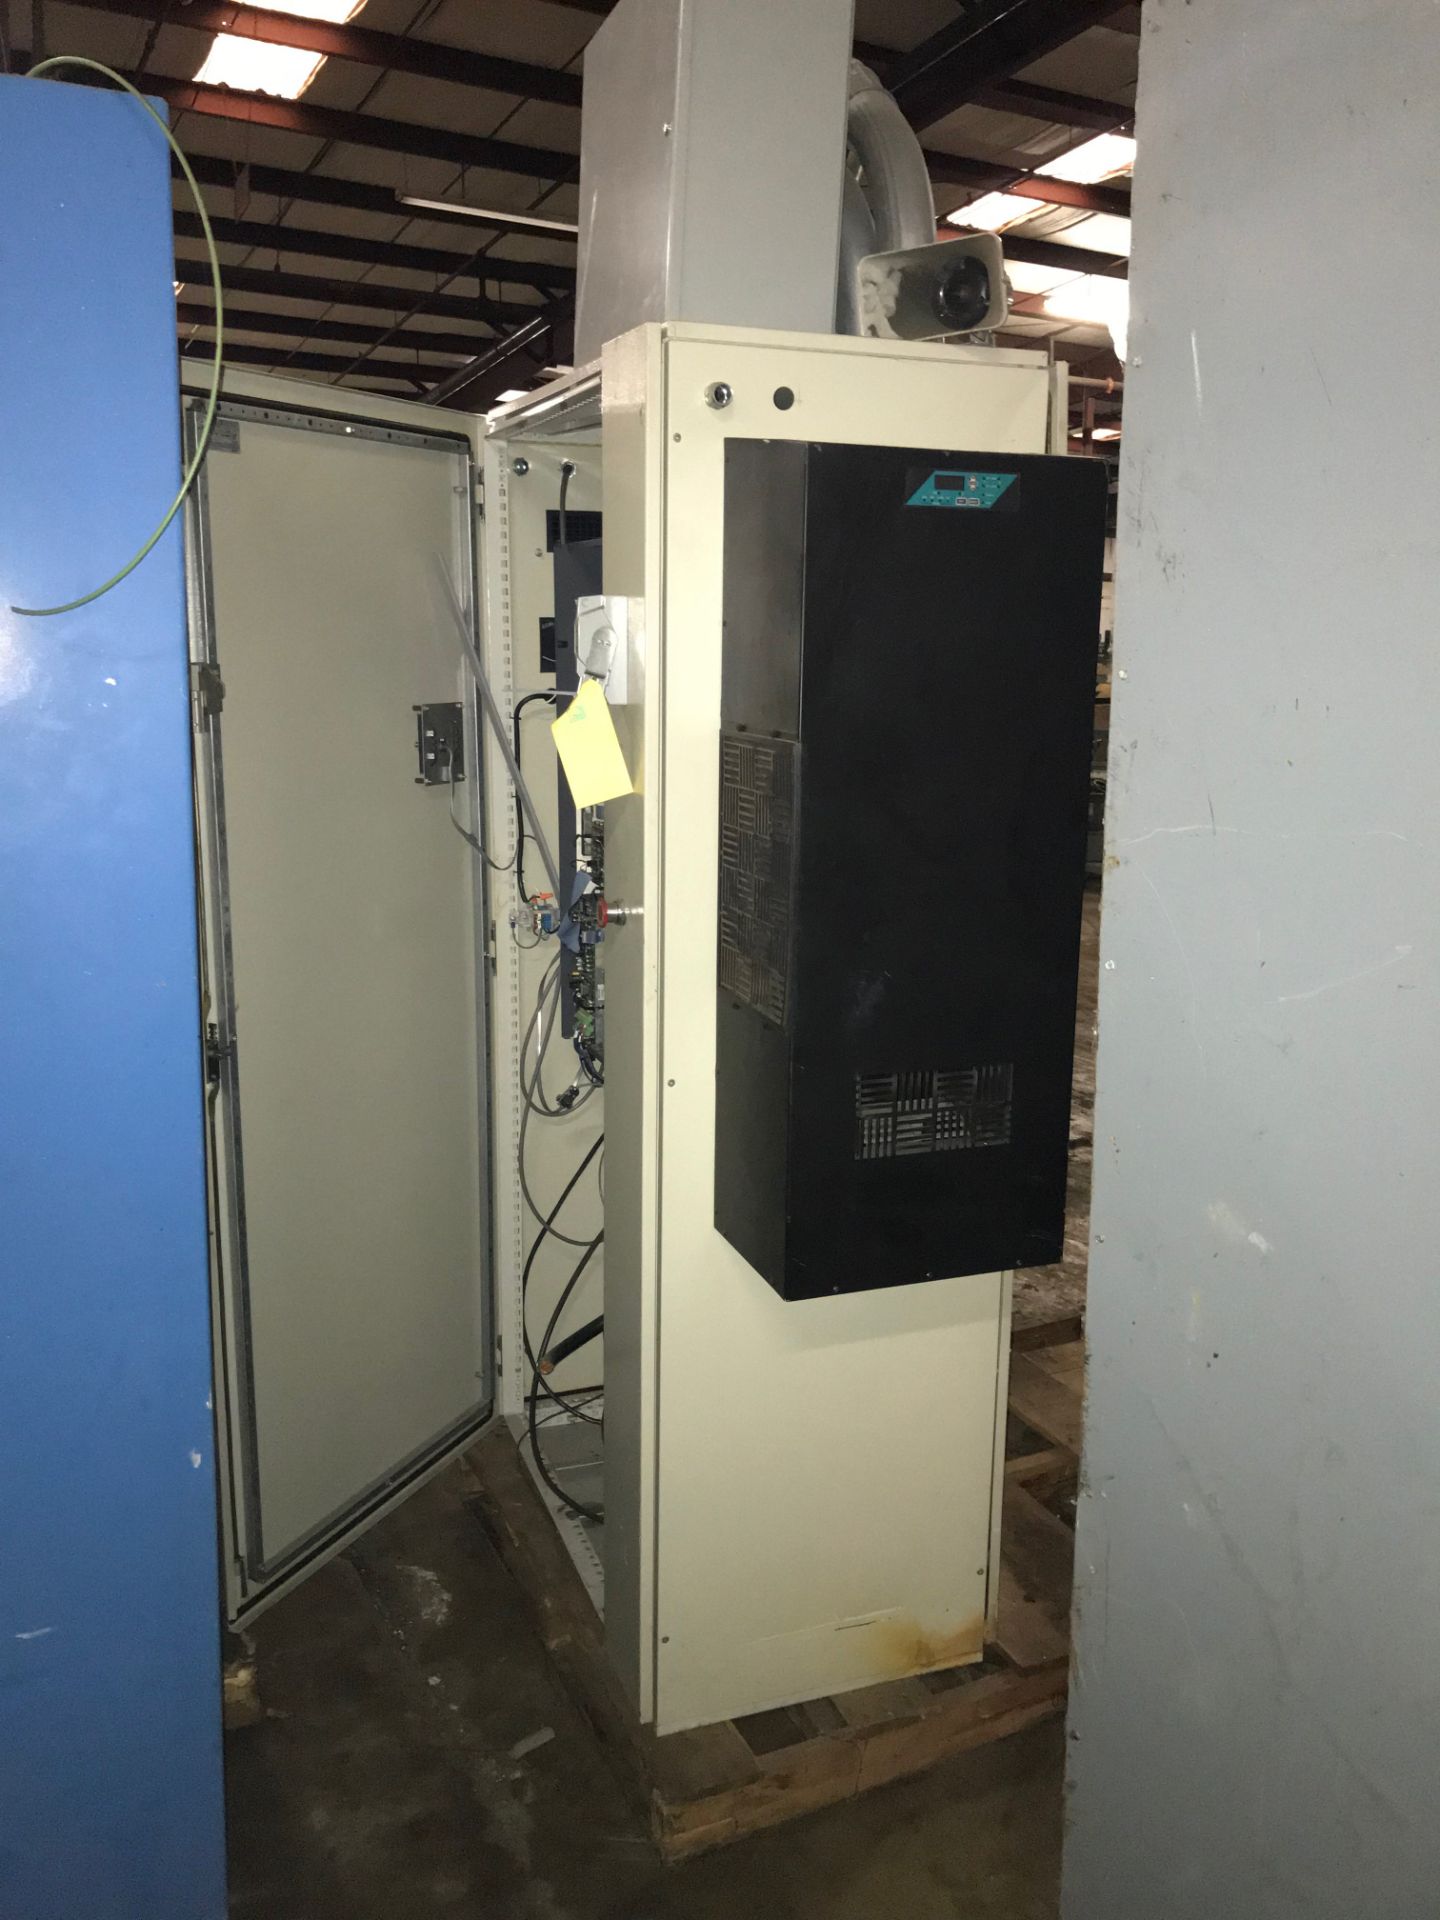 Saftronics MCC/ Electrical Enclosure Cabinet, 200 HP, softronics ac drive, 400 amp breaker, 3 phase, - Image 2 of 5